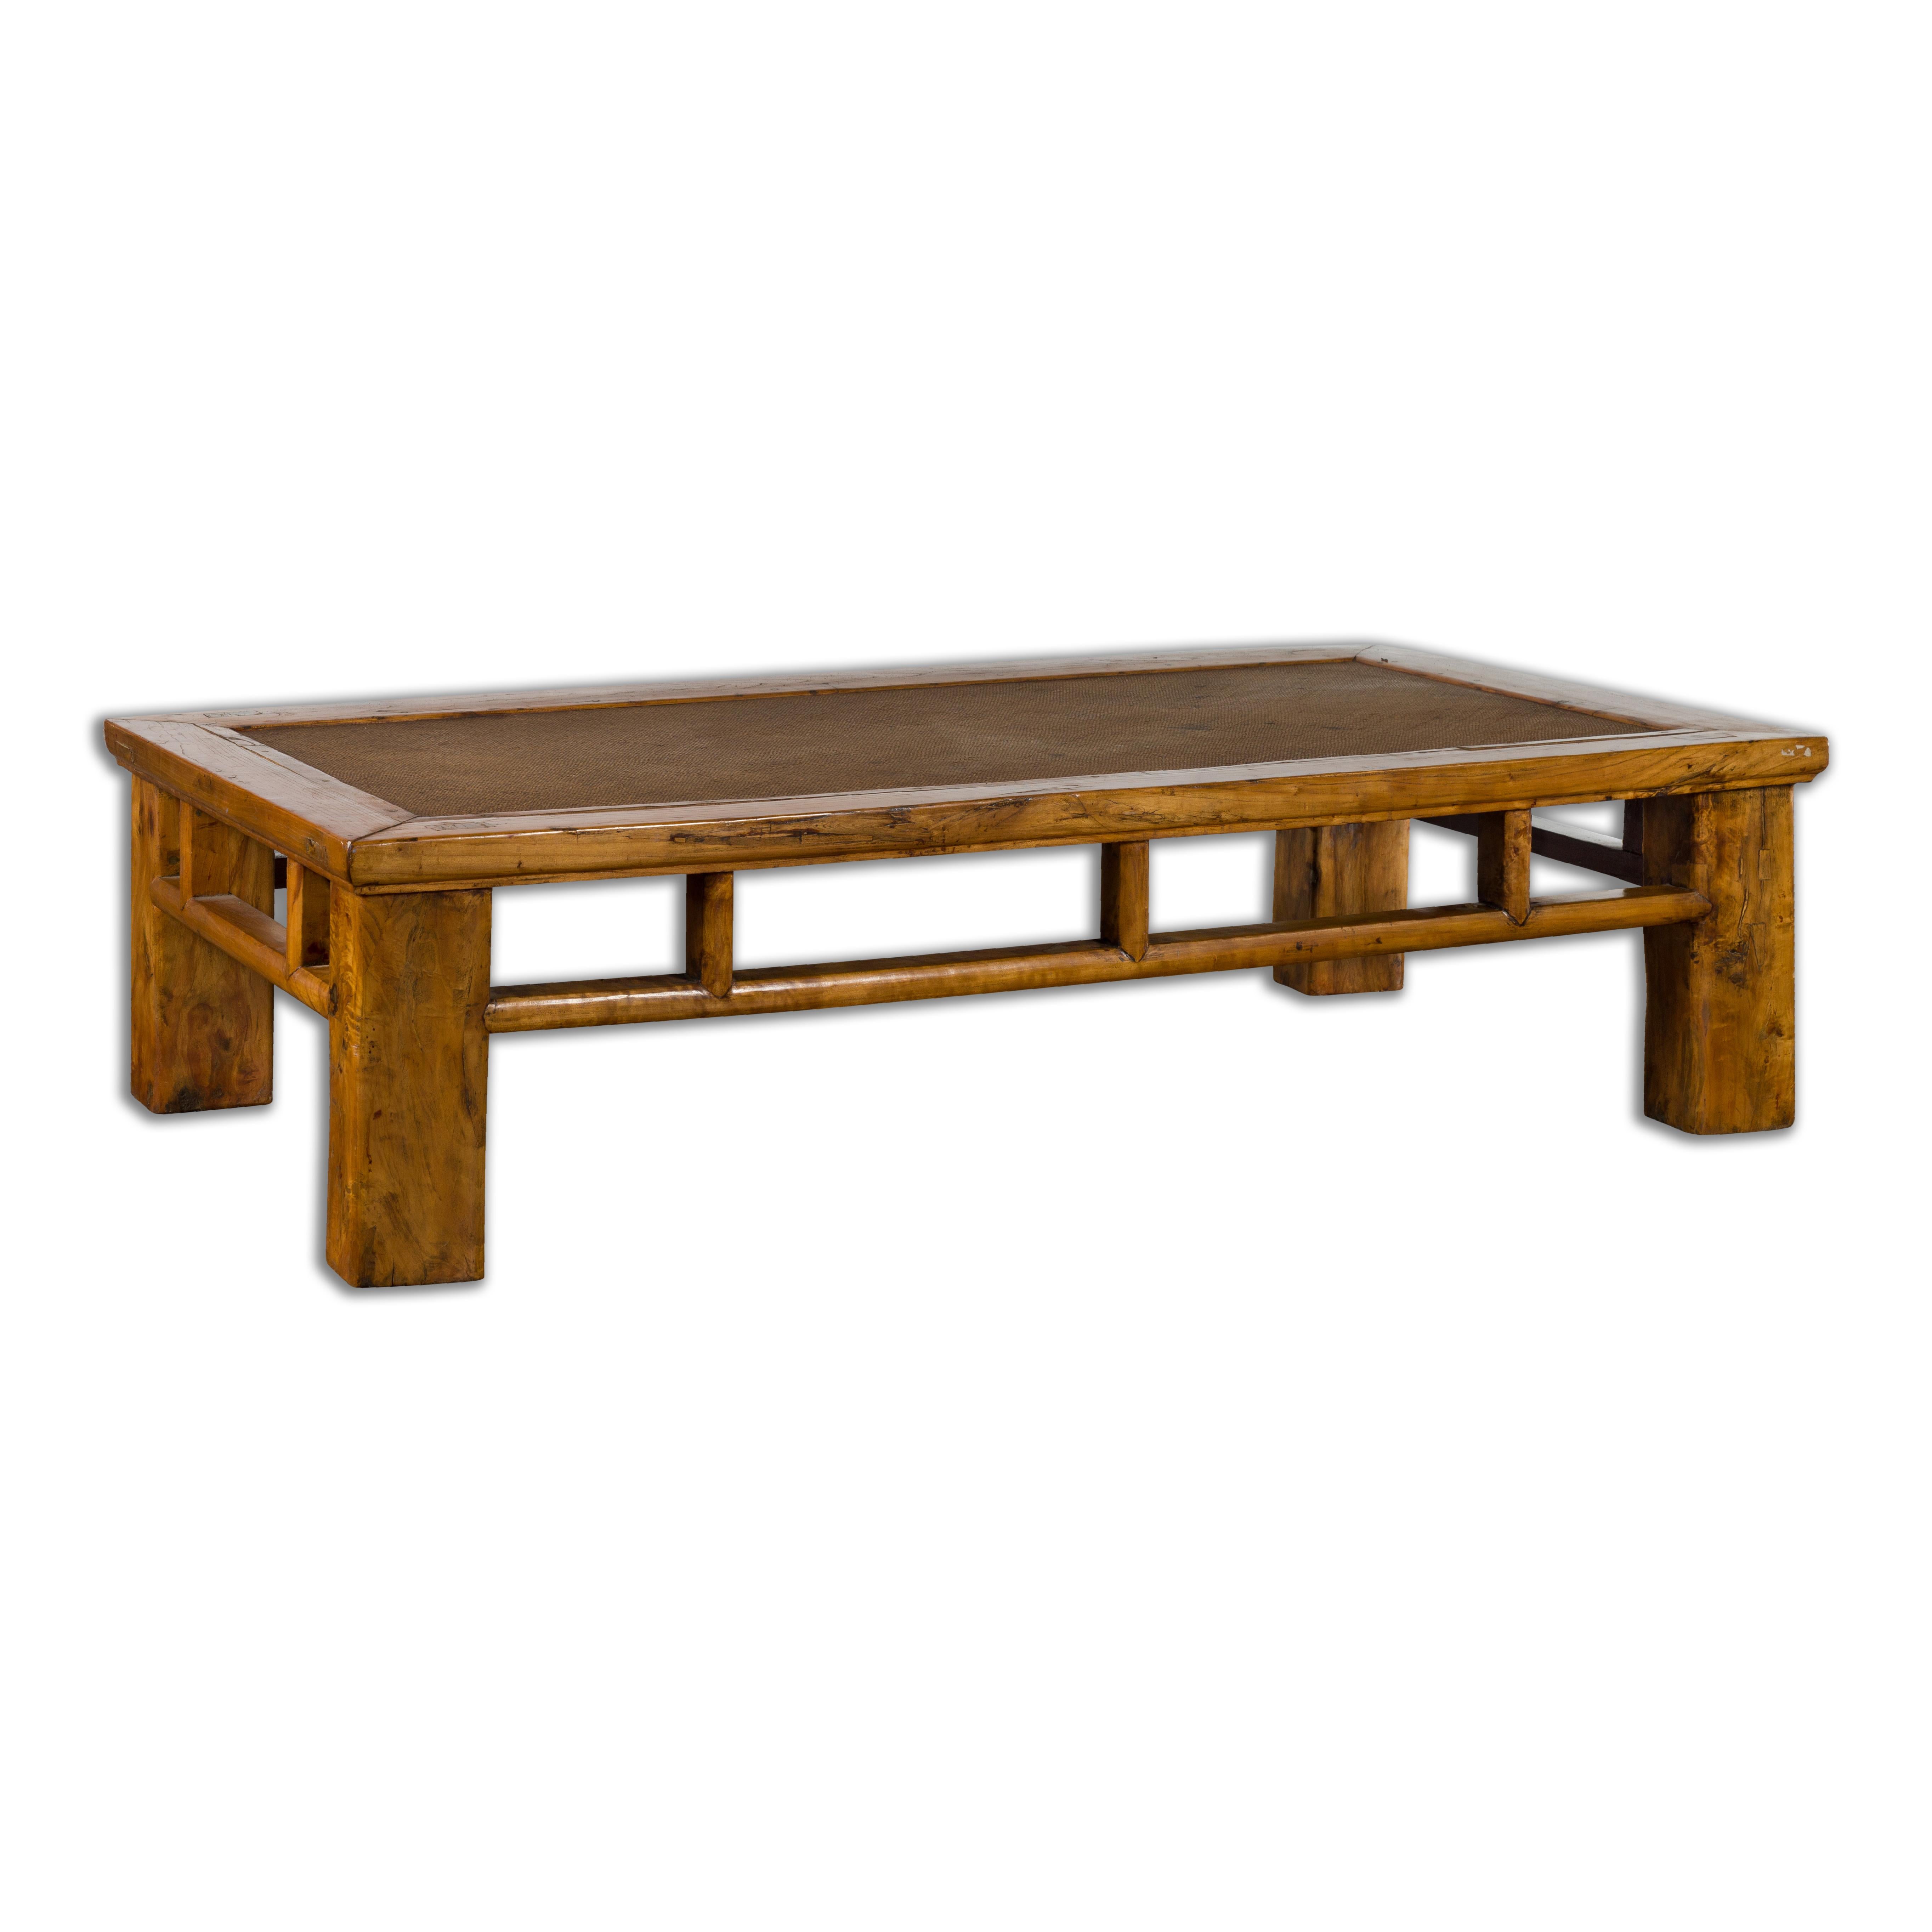 Chinese Qing Dynasty Elm Lohan Bed Coffee Table with Hand-Woven Rattan Top For Sale 12